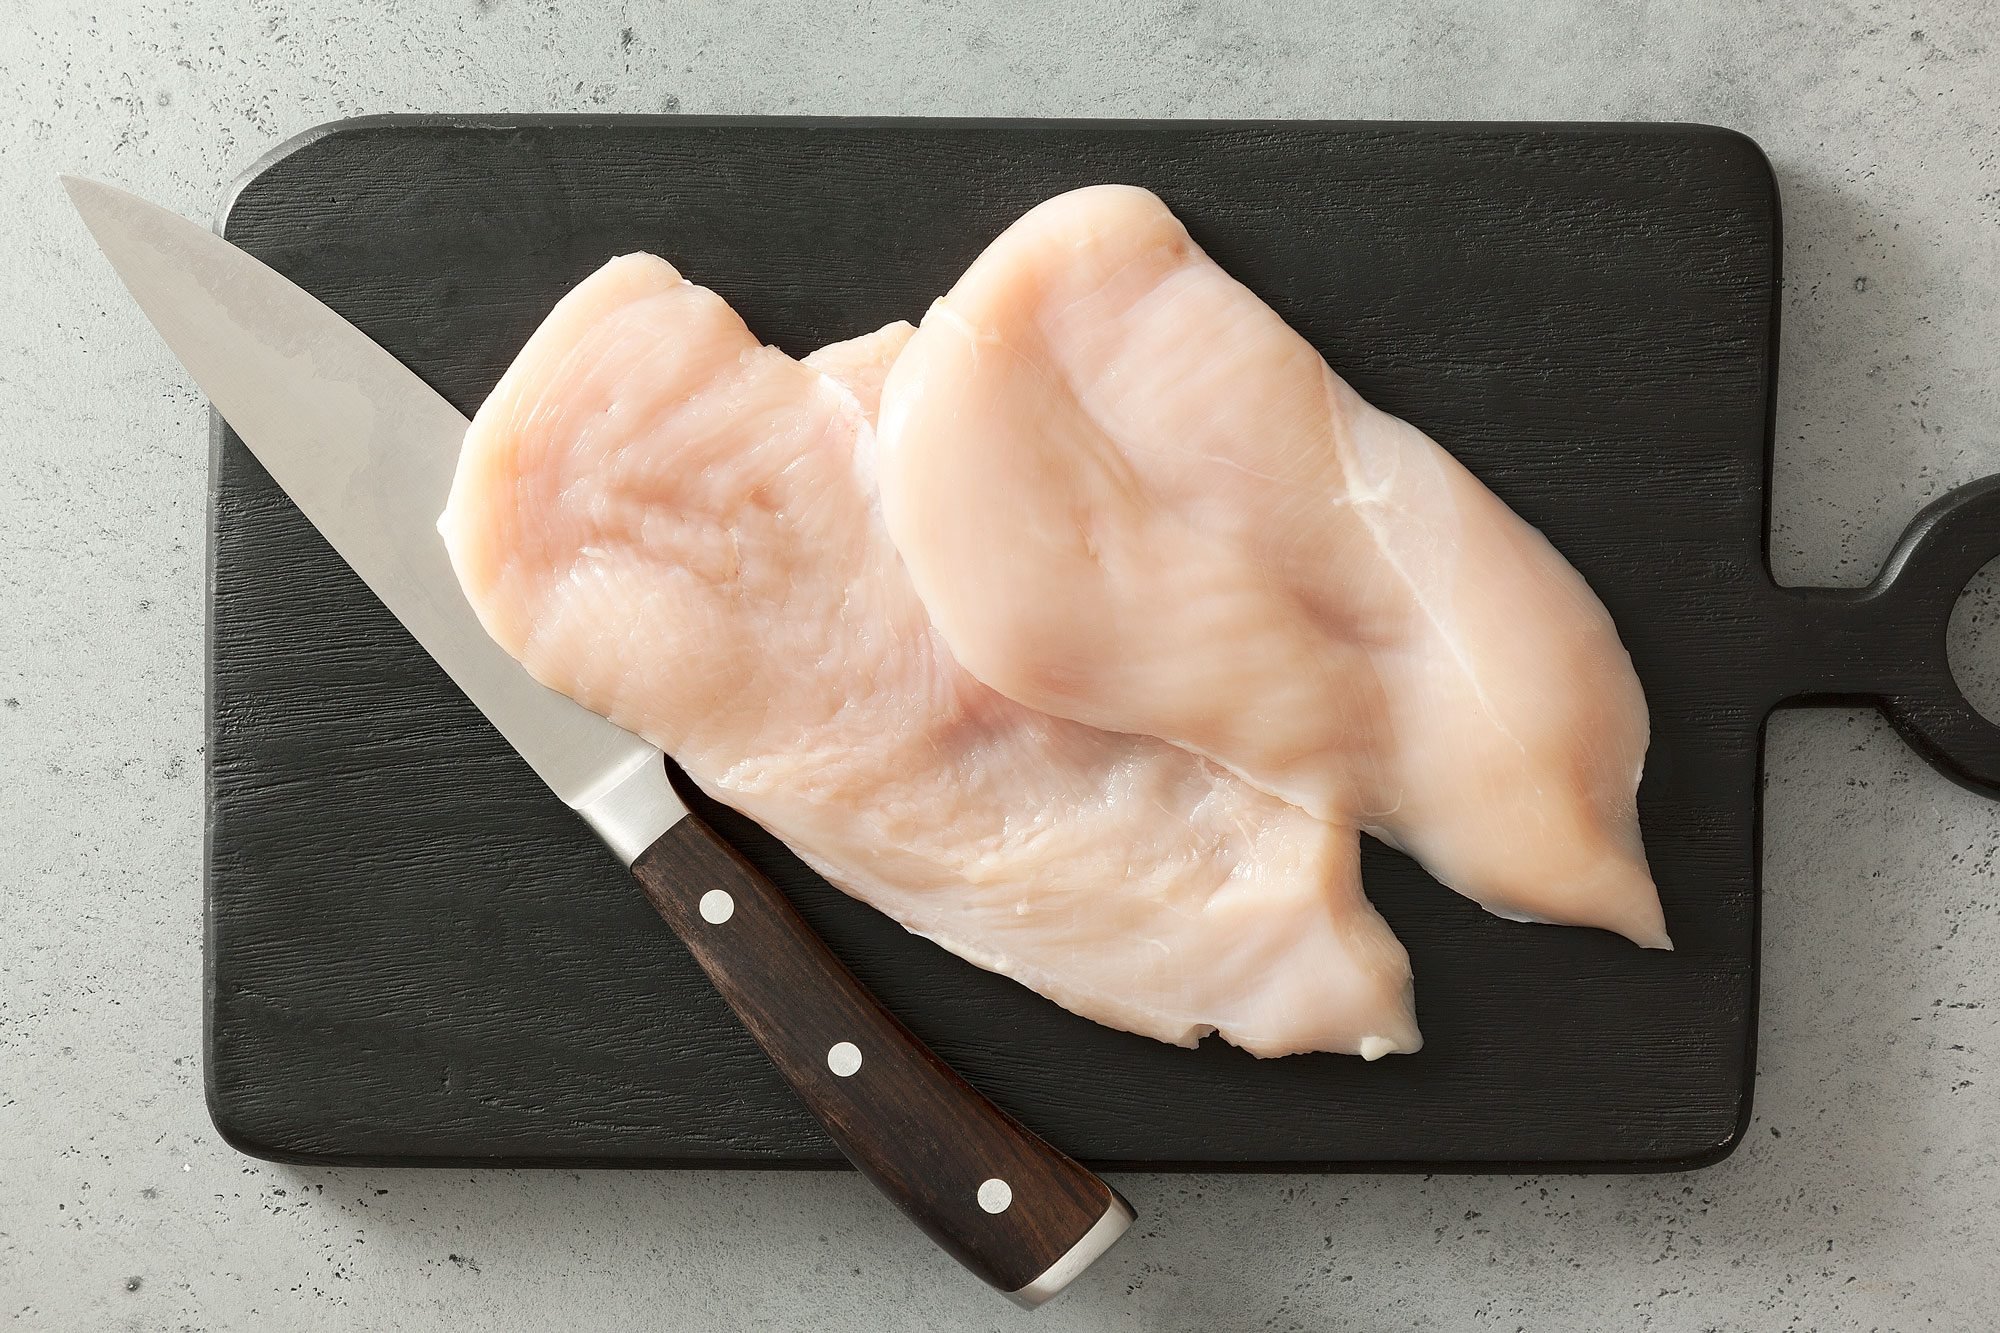 Chicken Breasts and a Knife on Chopping Board on Grey Surface